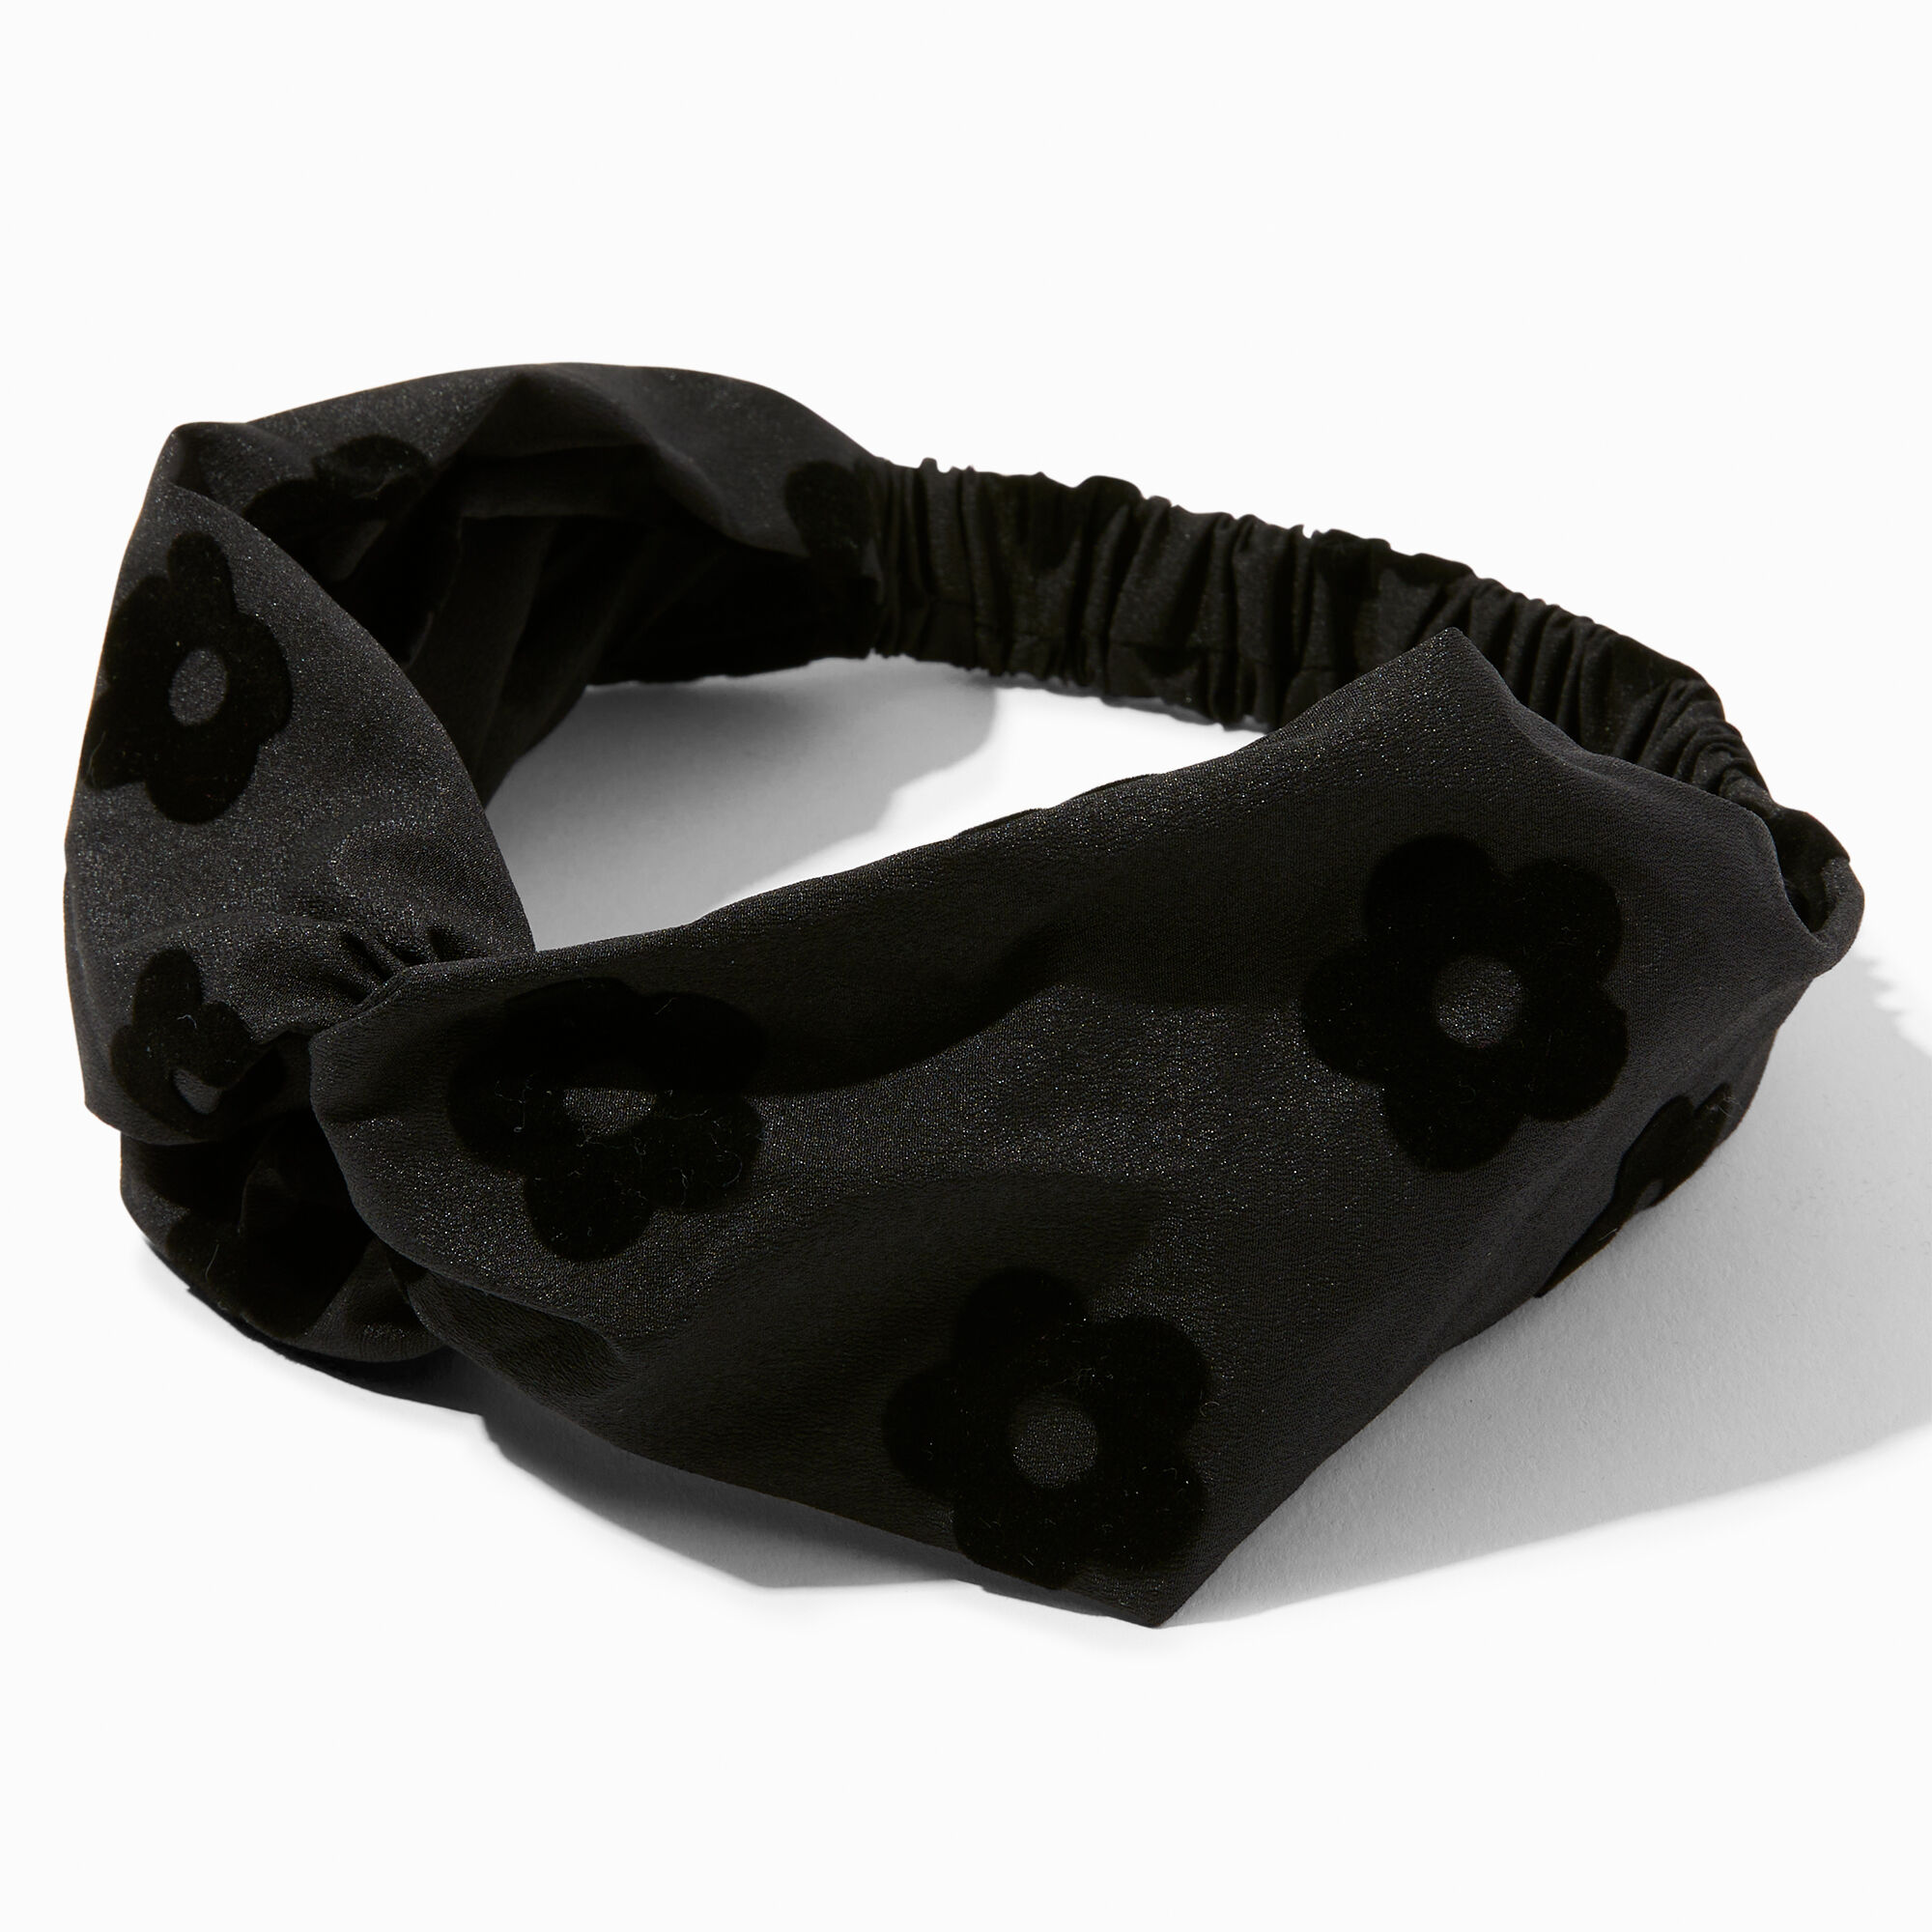 View Claires Shimmer Daisy Headwrap Black information